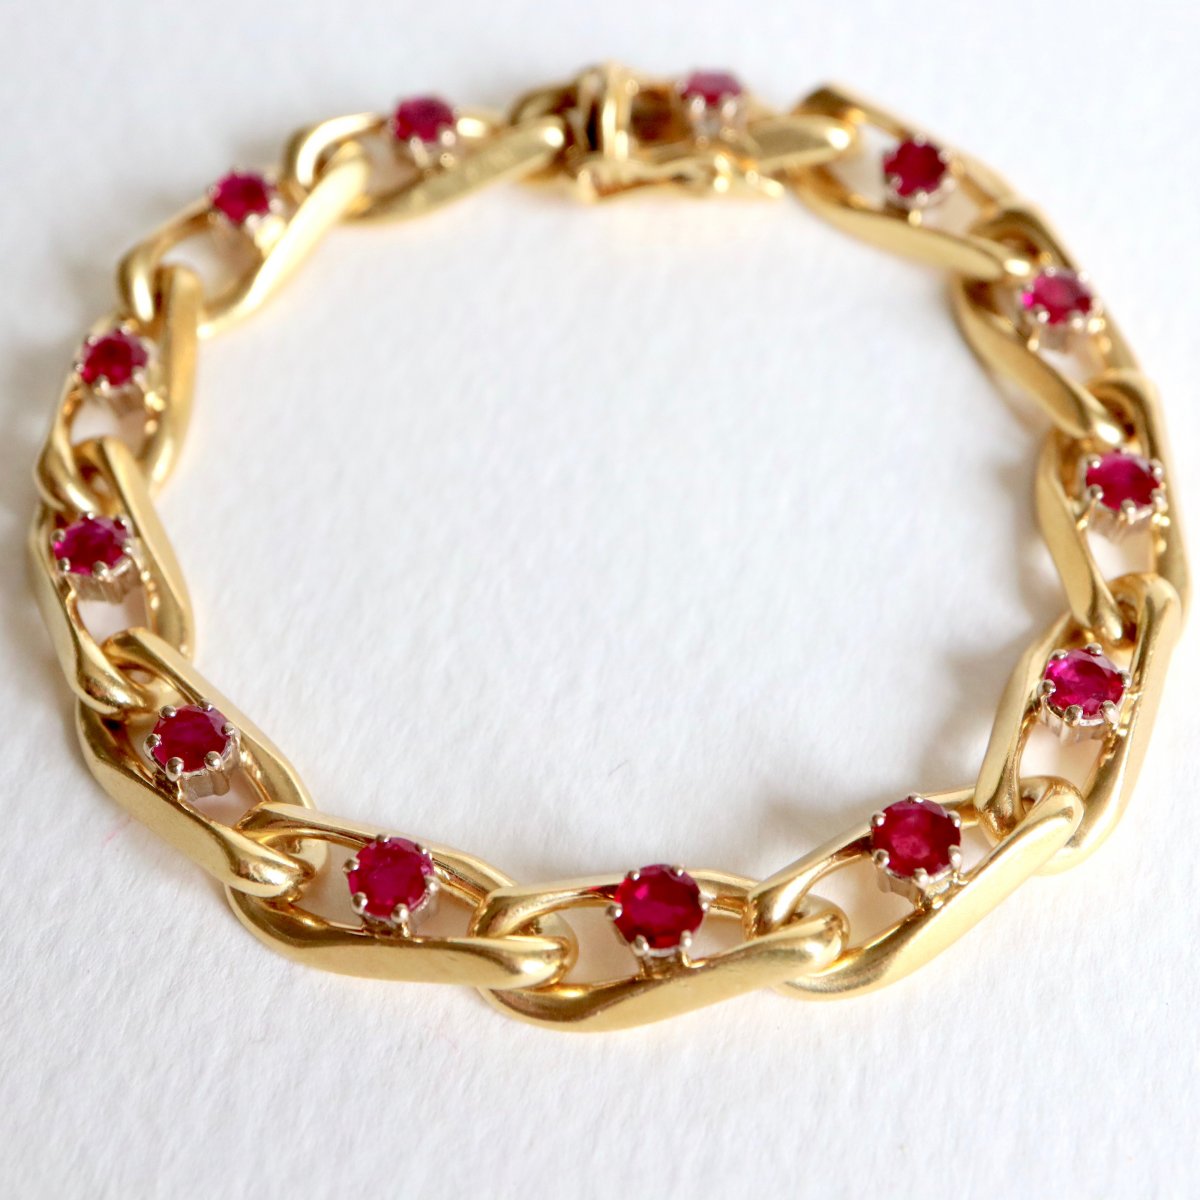 Chaumet Bracelet In 18kt Yellow Gold And Ruby